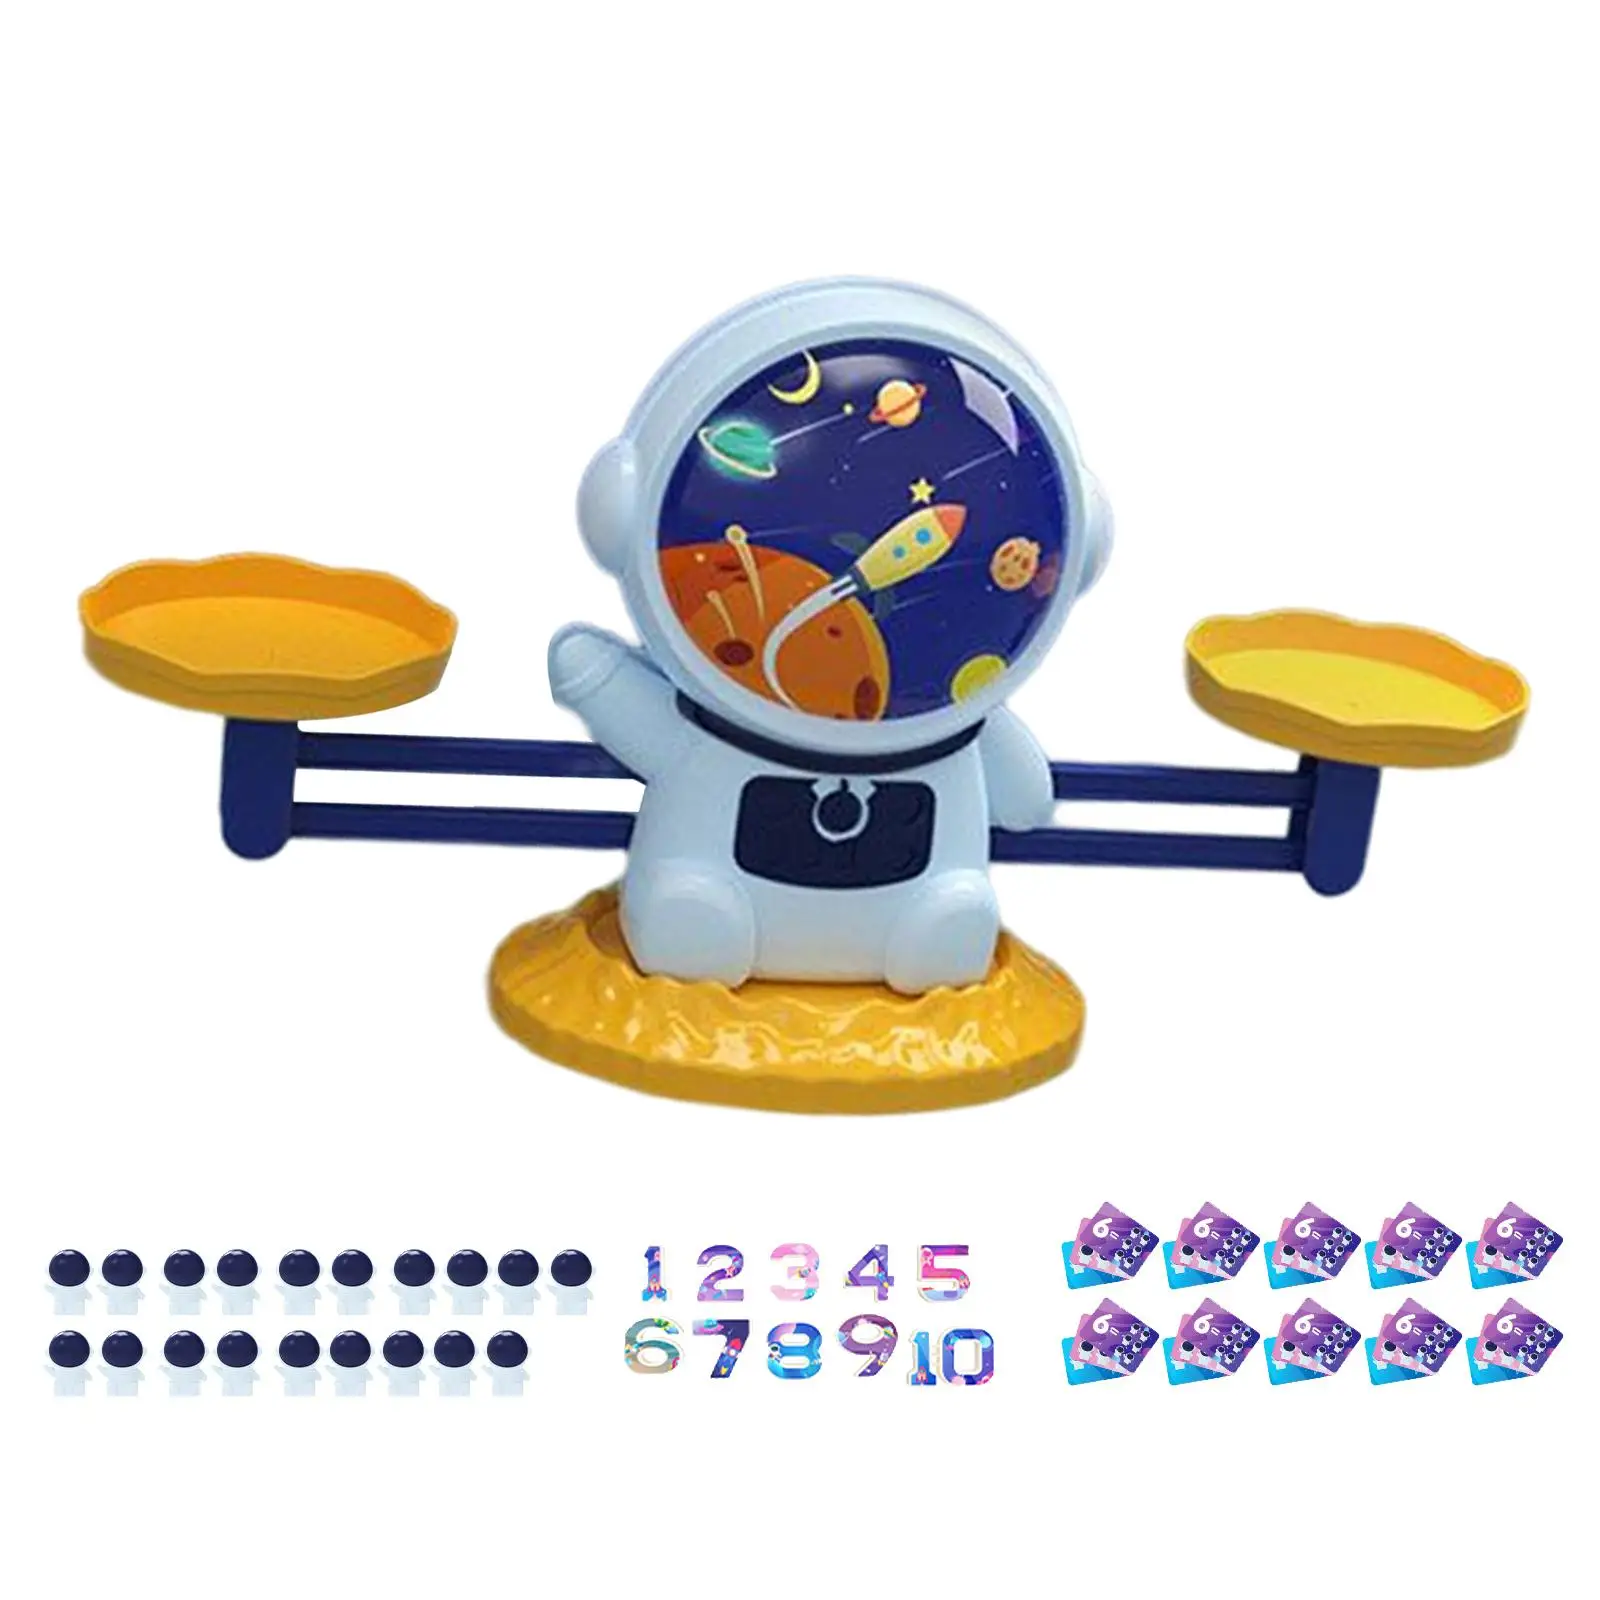 Balance Scale Number Board Game Educational Toys Balance Math Game for Children`s Gift